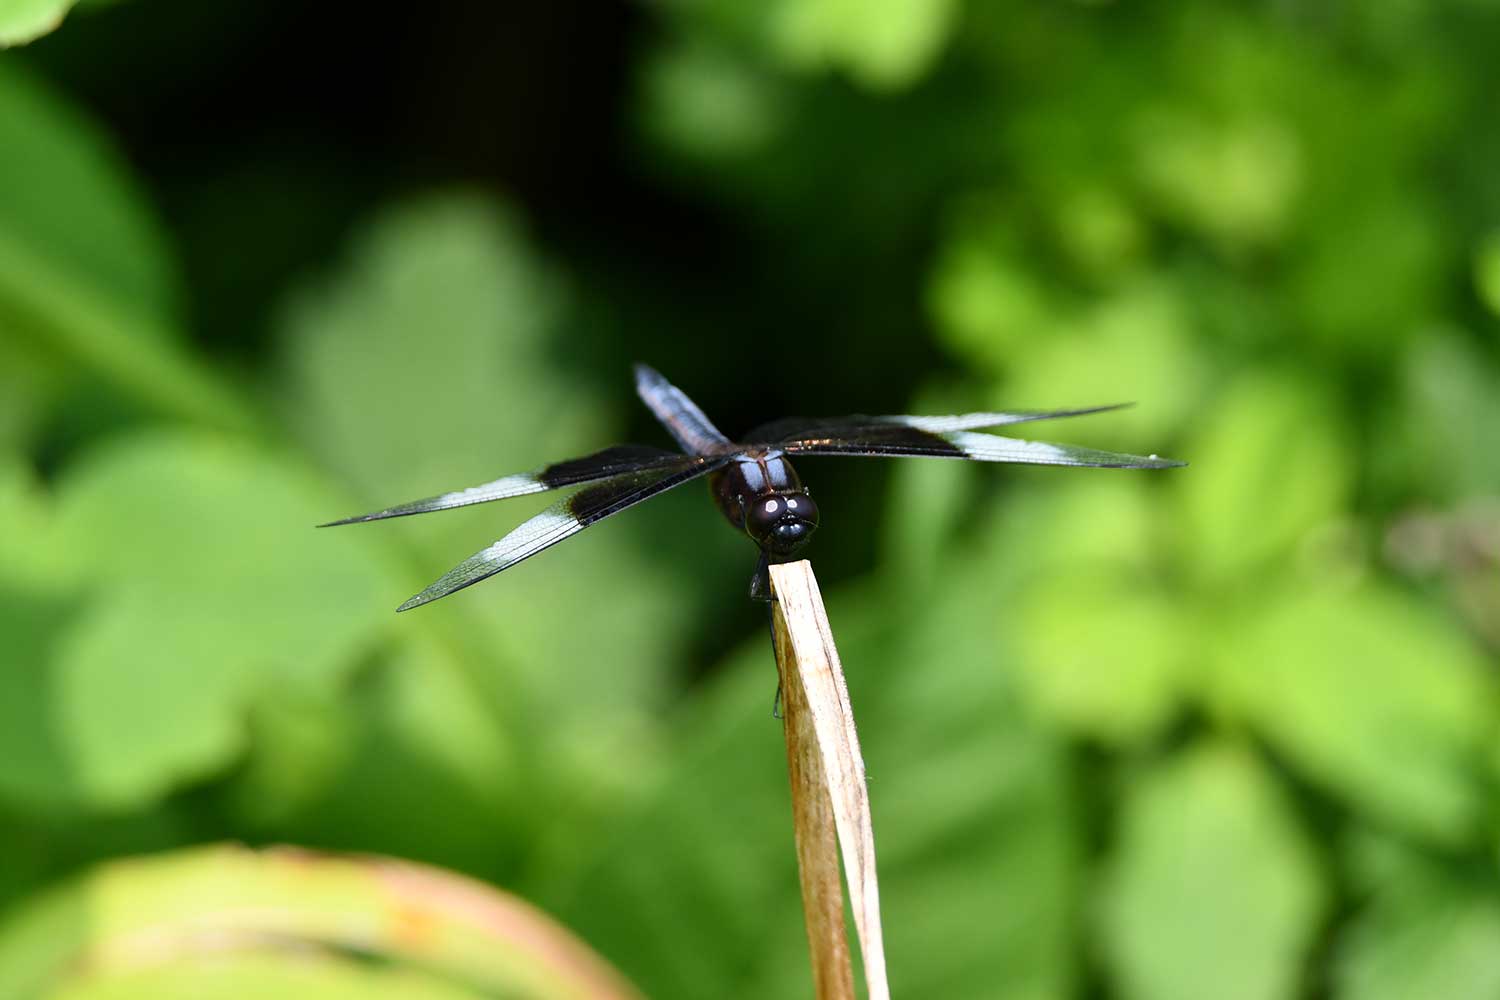 A dragonfly perched atop a blade of grass.